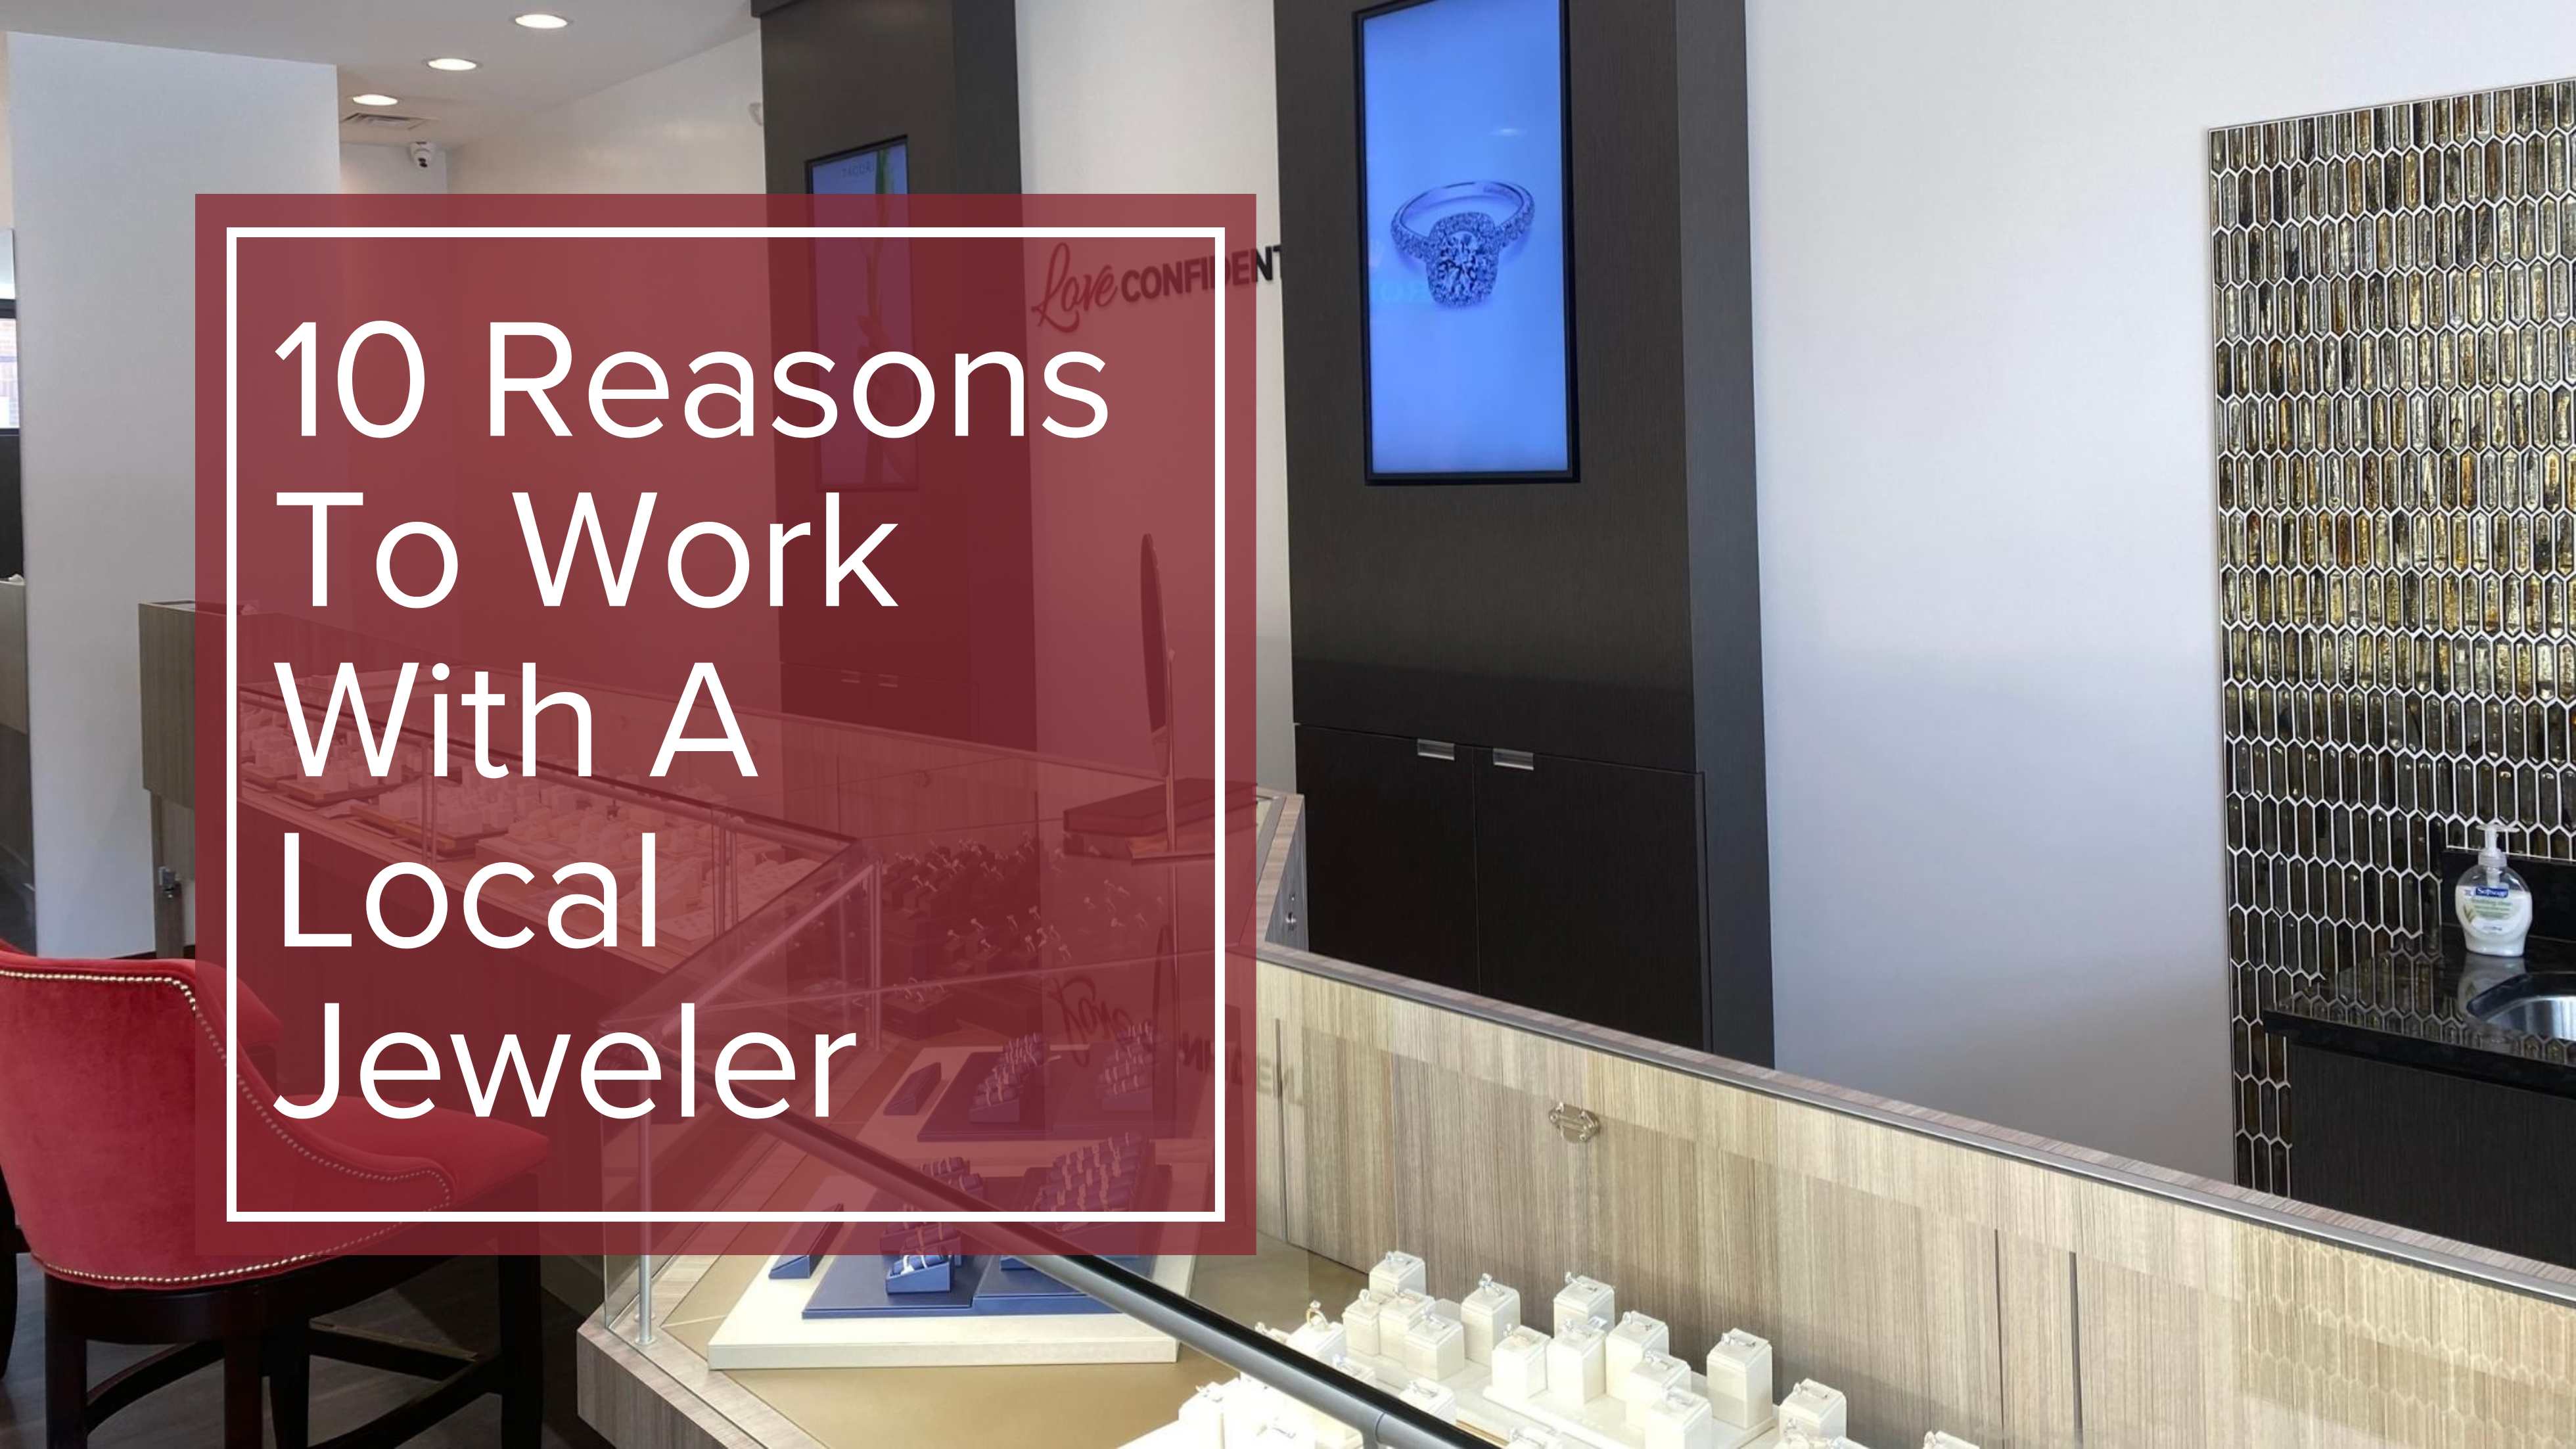 10 Reasons to Work with a Local Jeweler